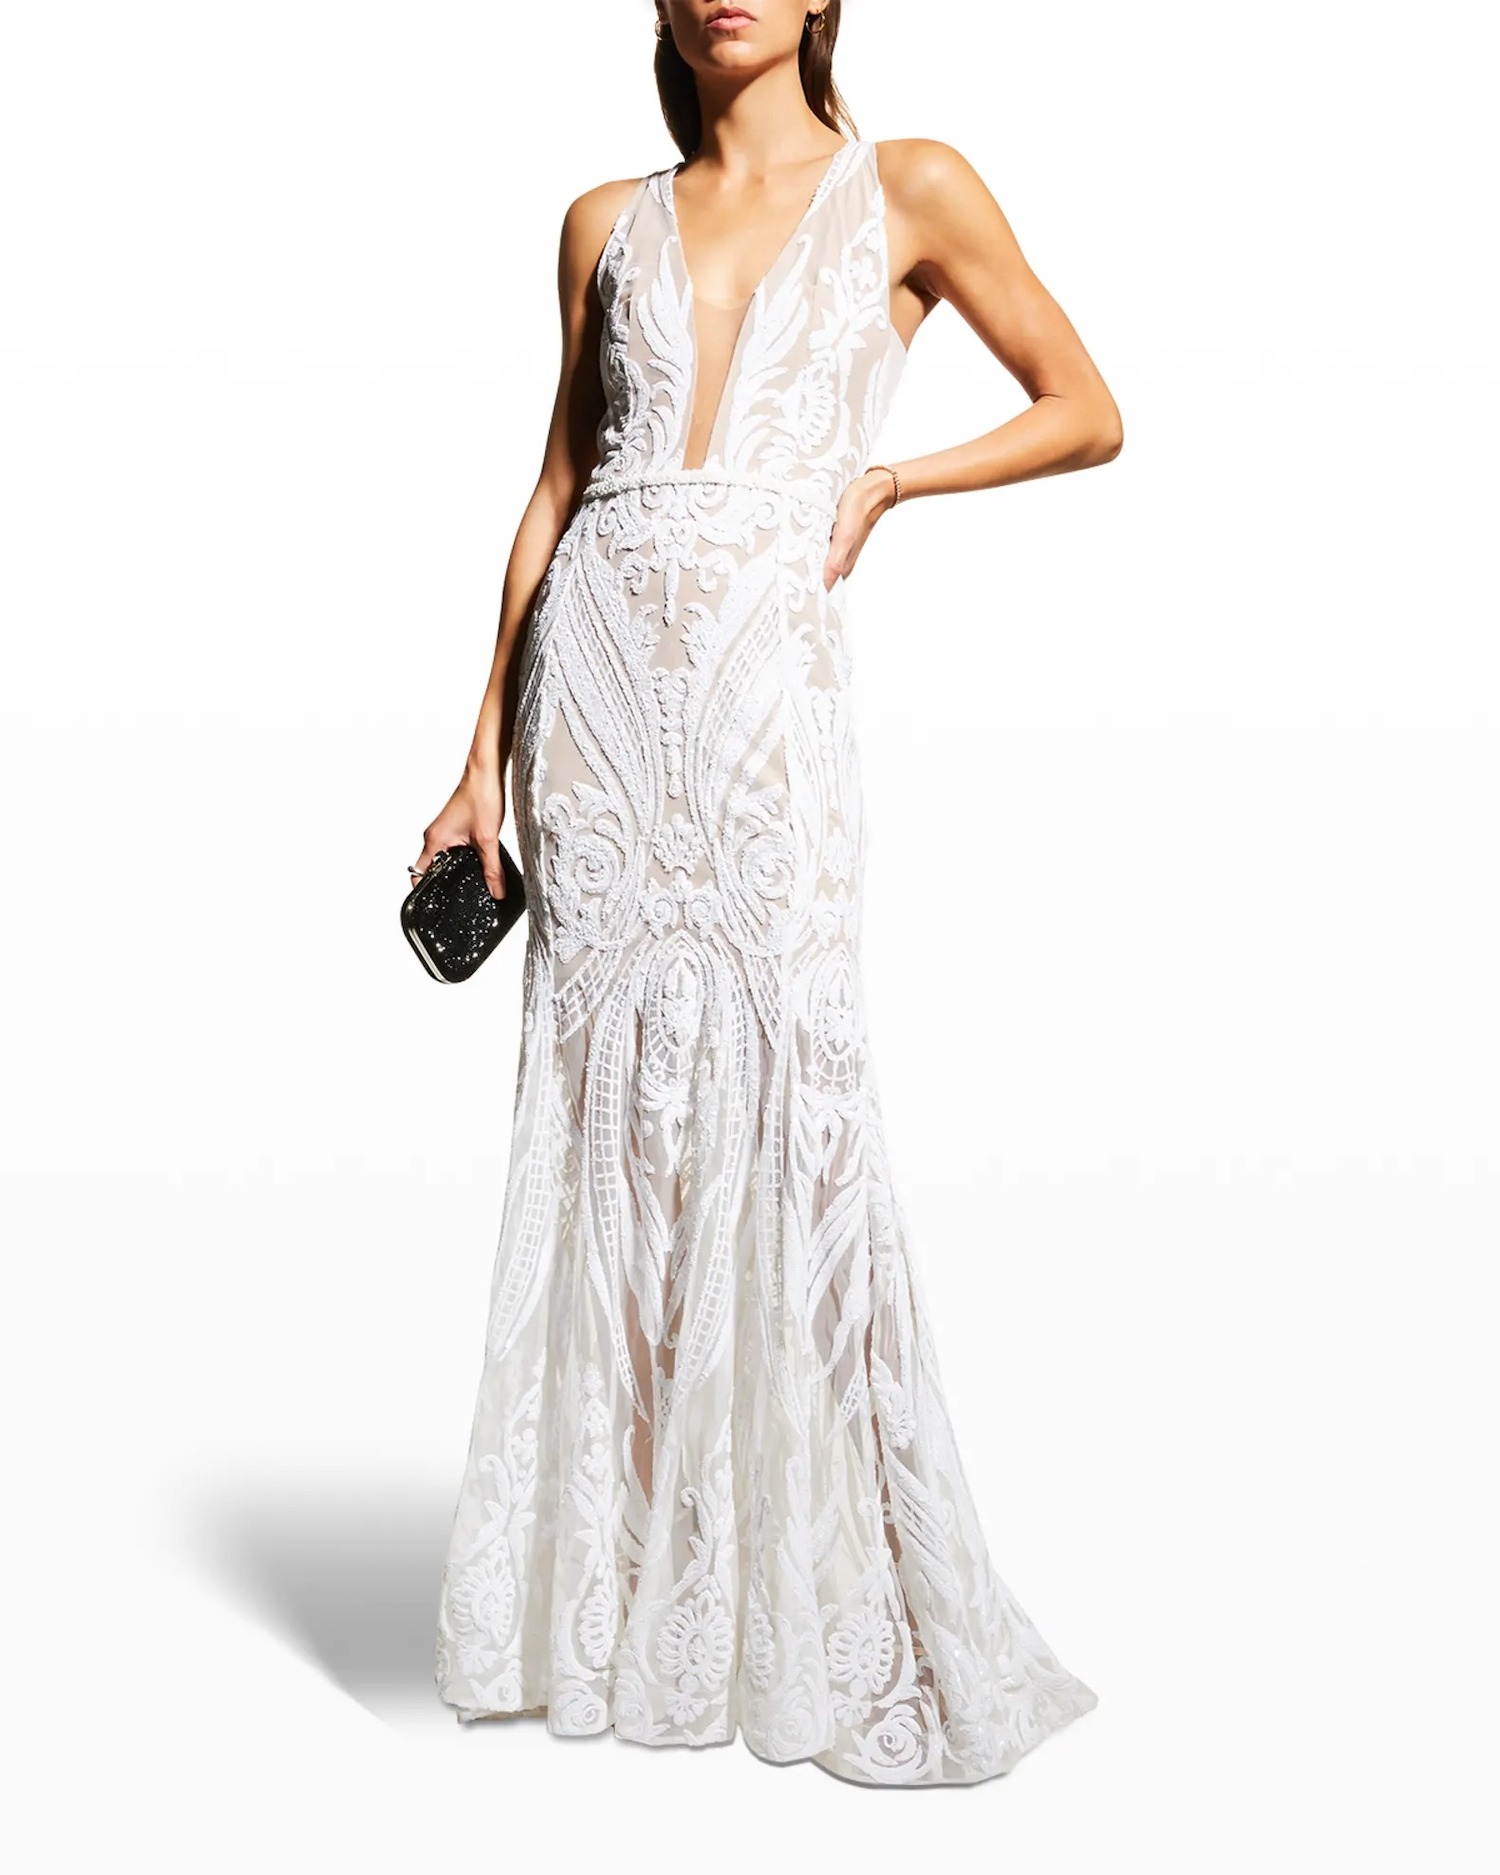 plunging neckline bohemian lace online wedding dress from Neiman Marcus